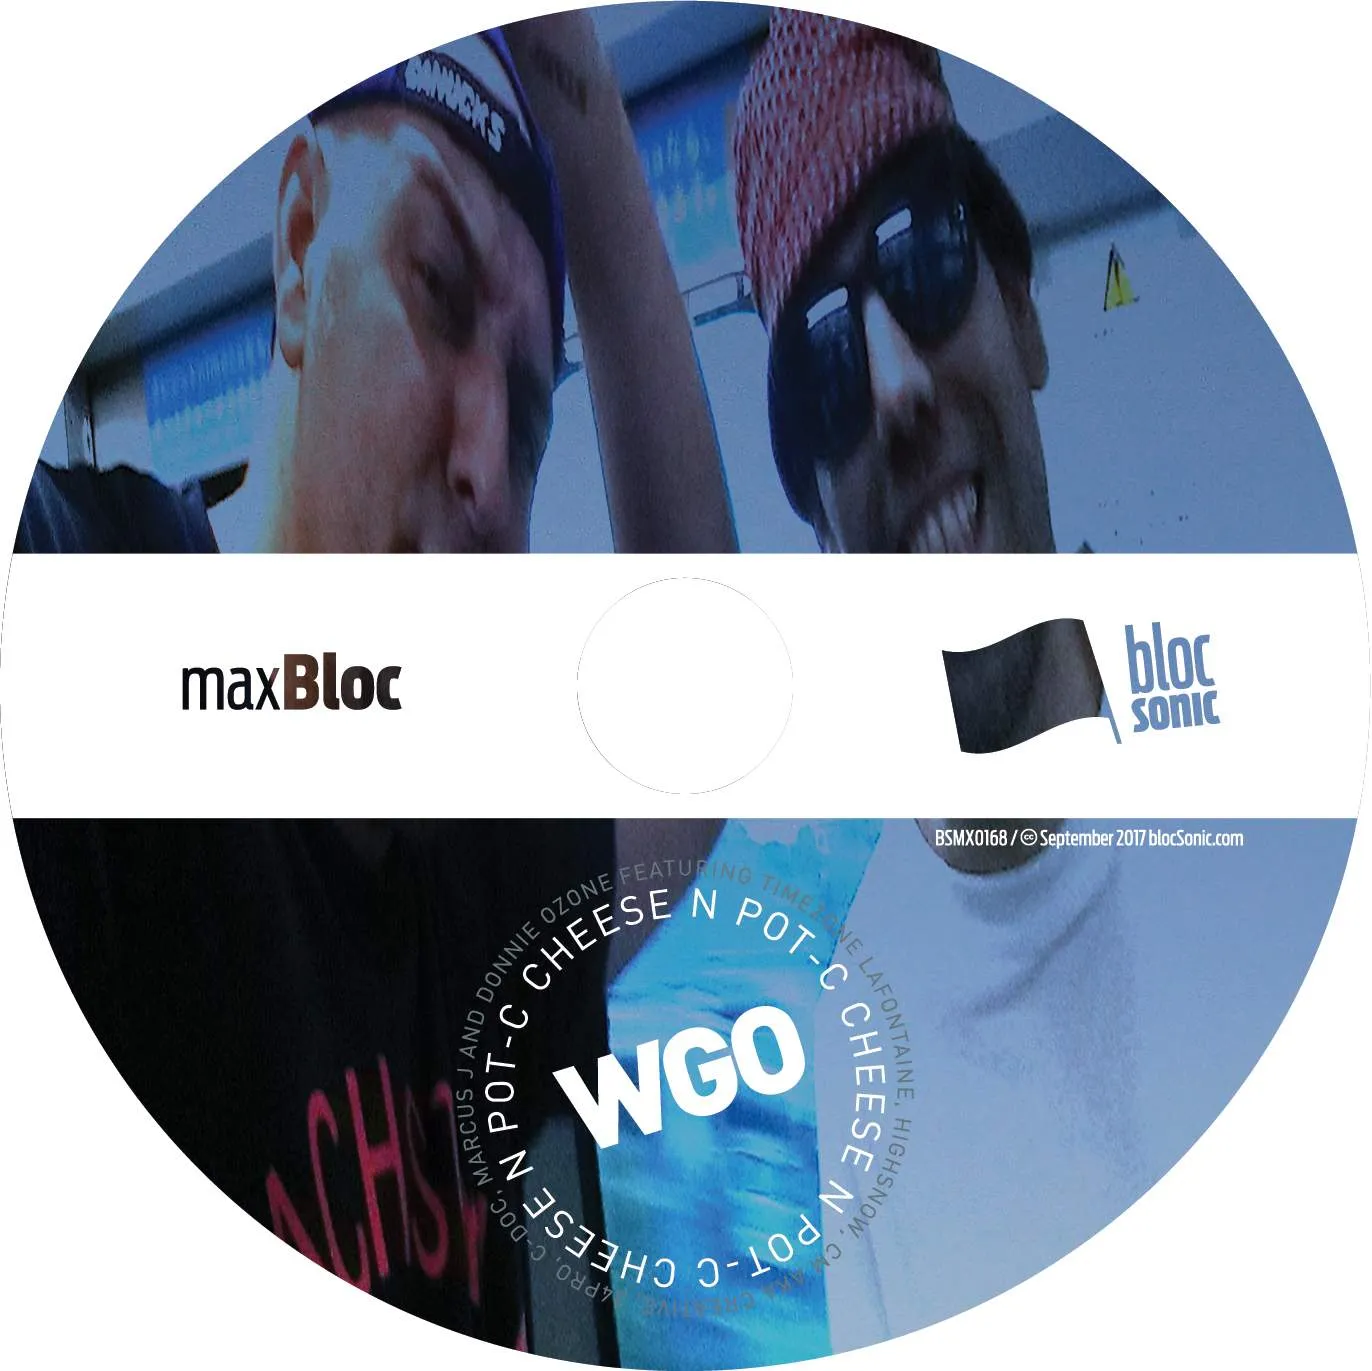 Album disc for “WGO” by Cheese N Pot-C